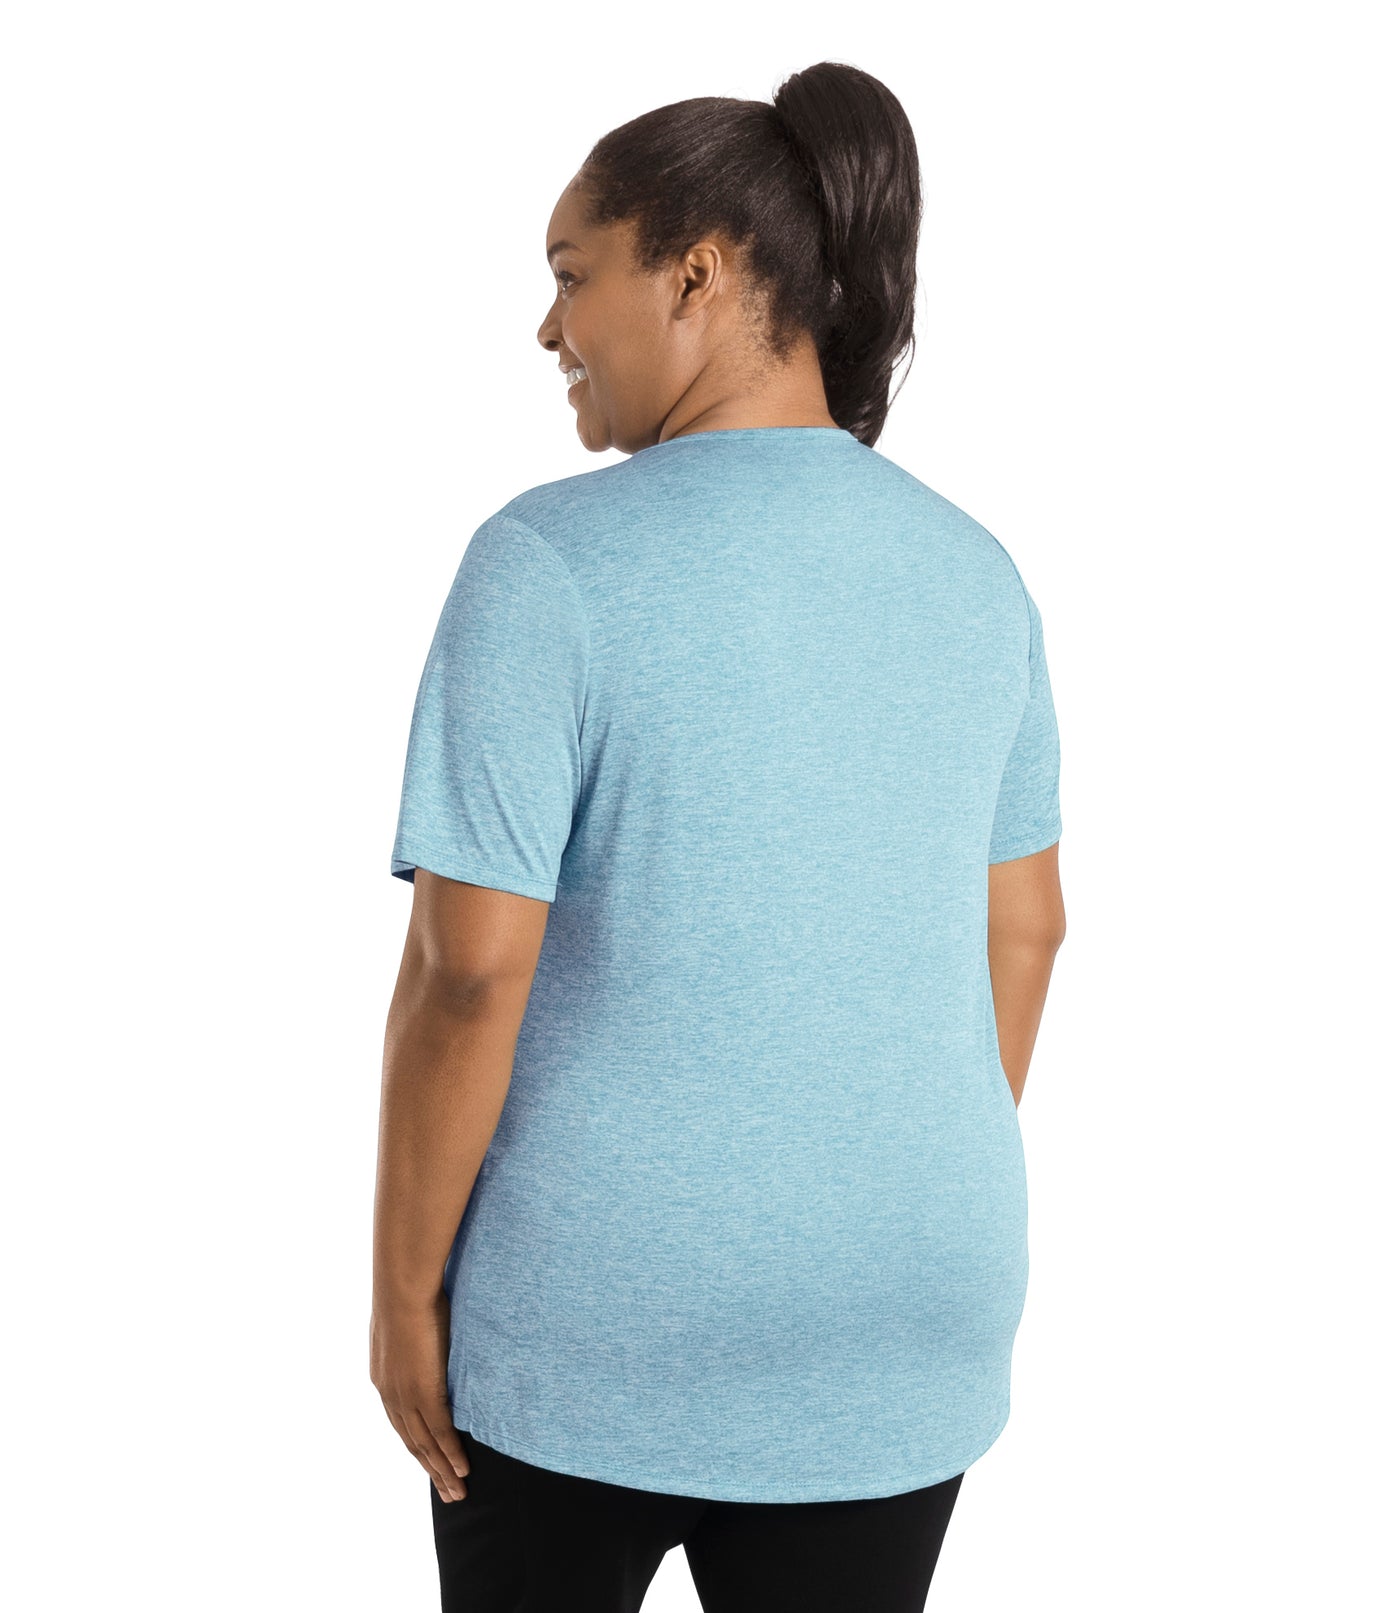 Plus size woman wearing JunoActive's SunLite Scoop Neck back view wearing black pants and hands by side in heather light blue.